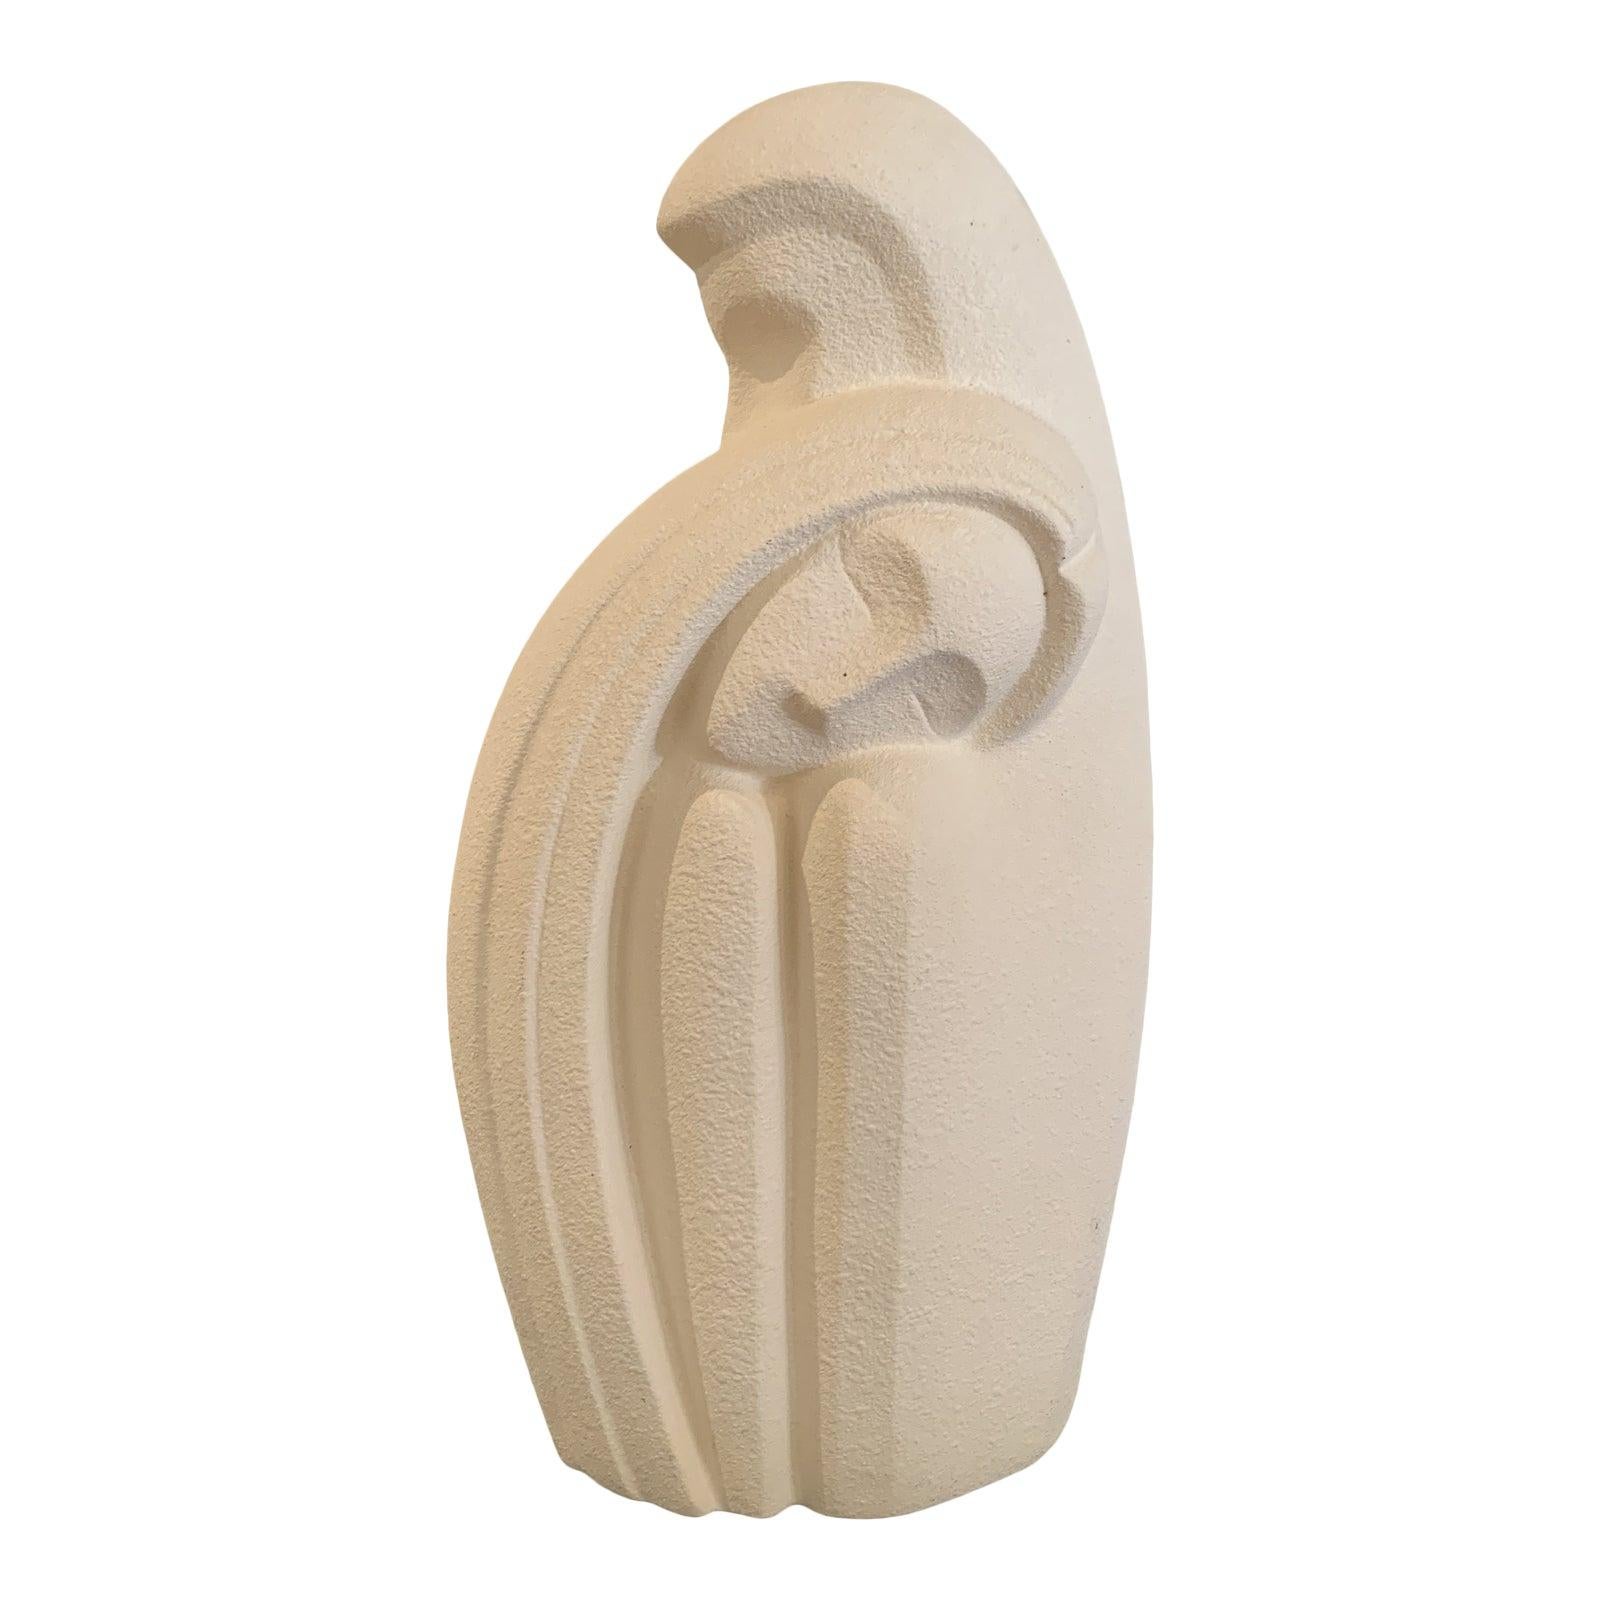 Unknown Figurative Sculpture - Vintage White Sandstone Statue of Caressing Couple